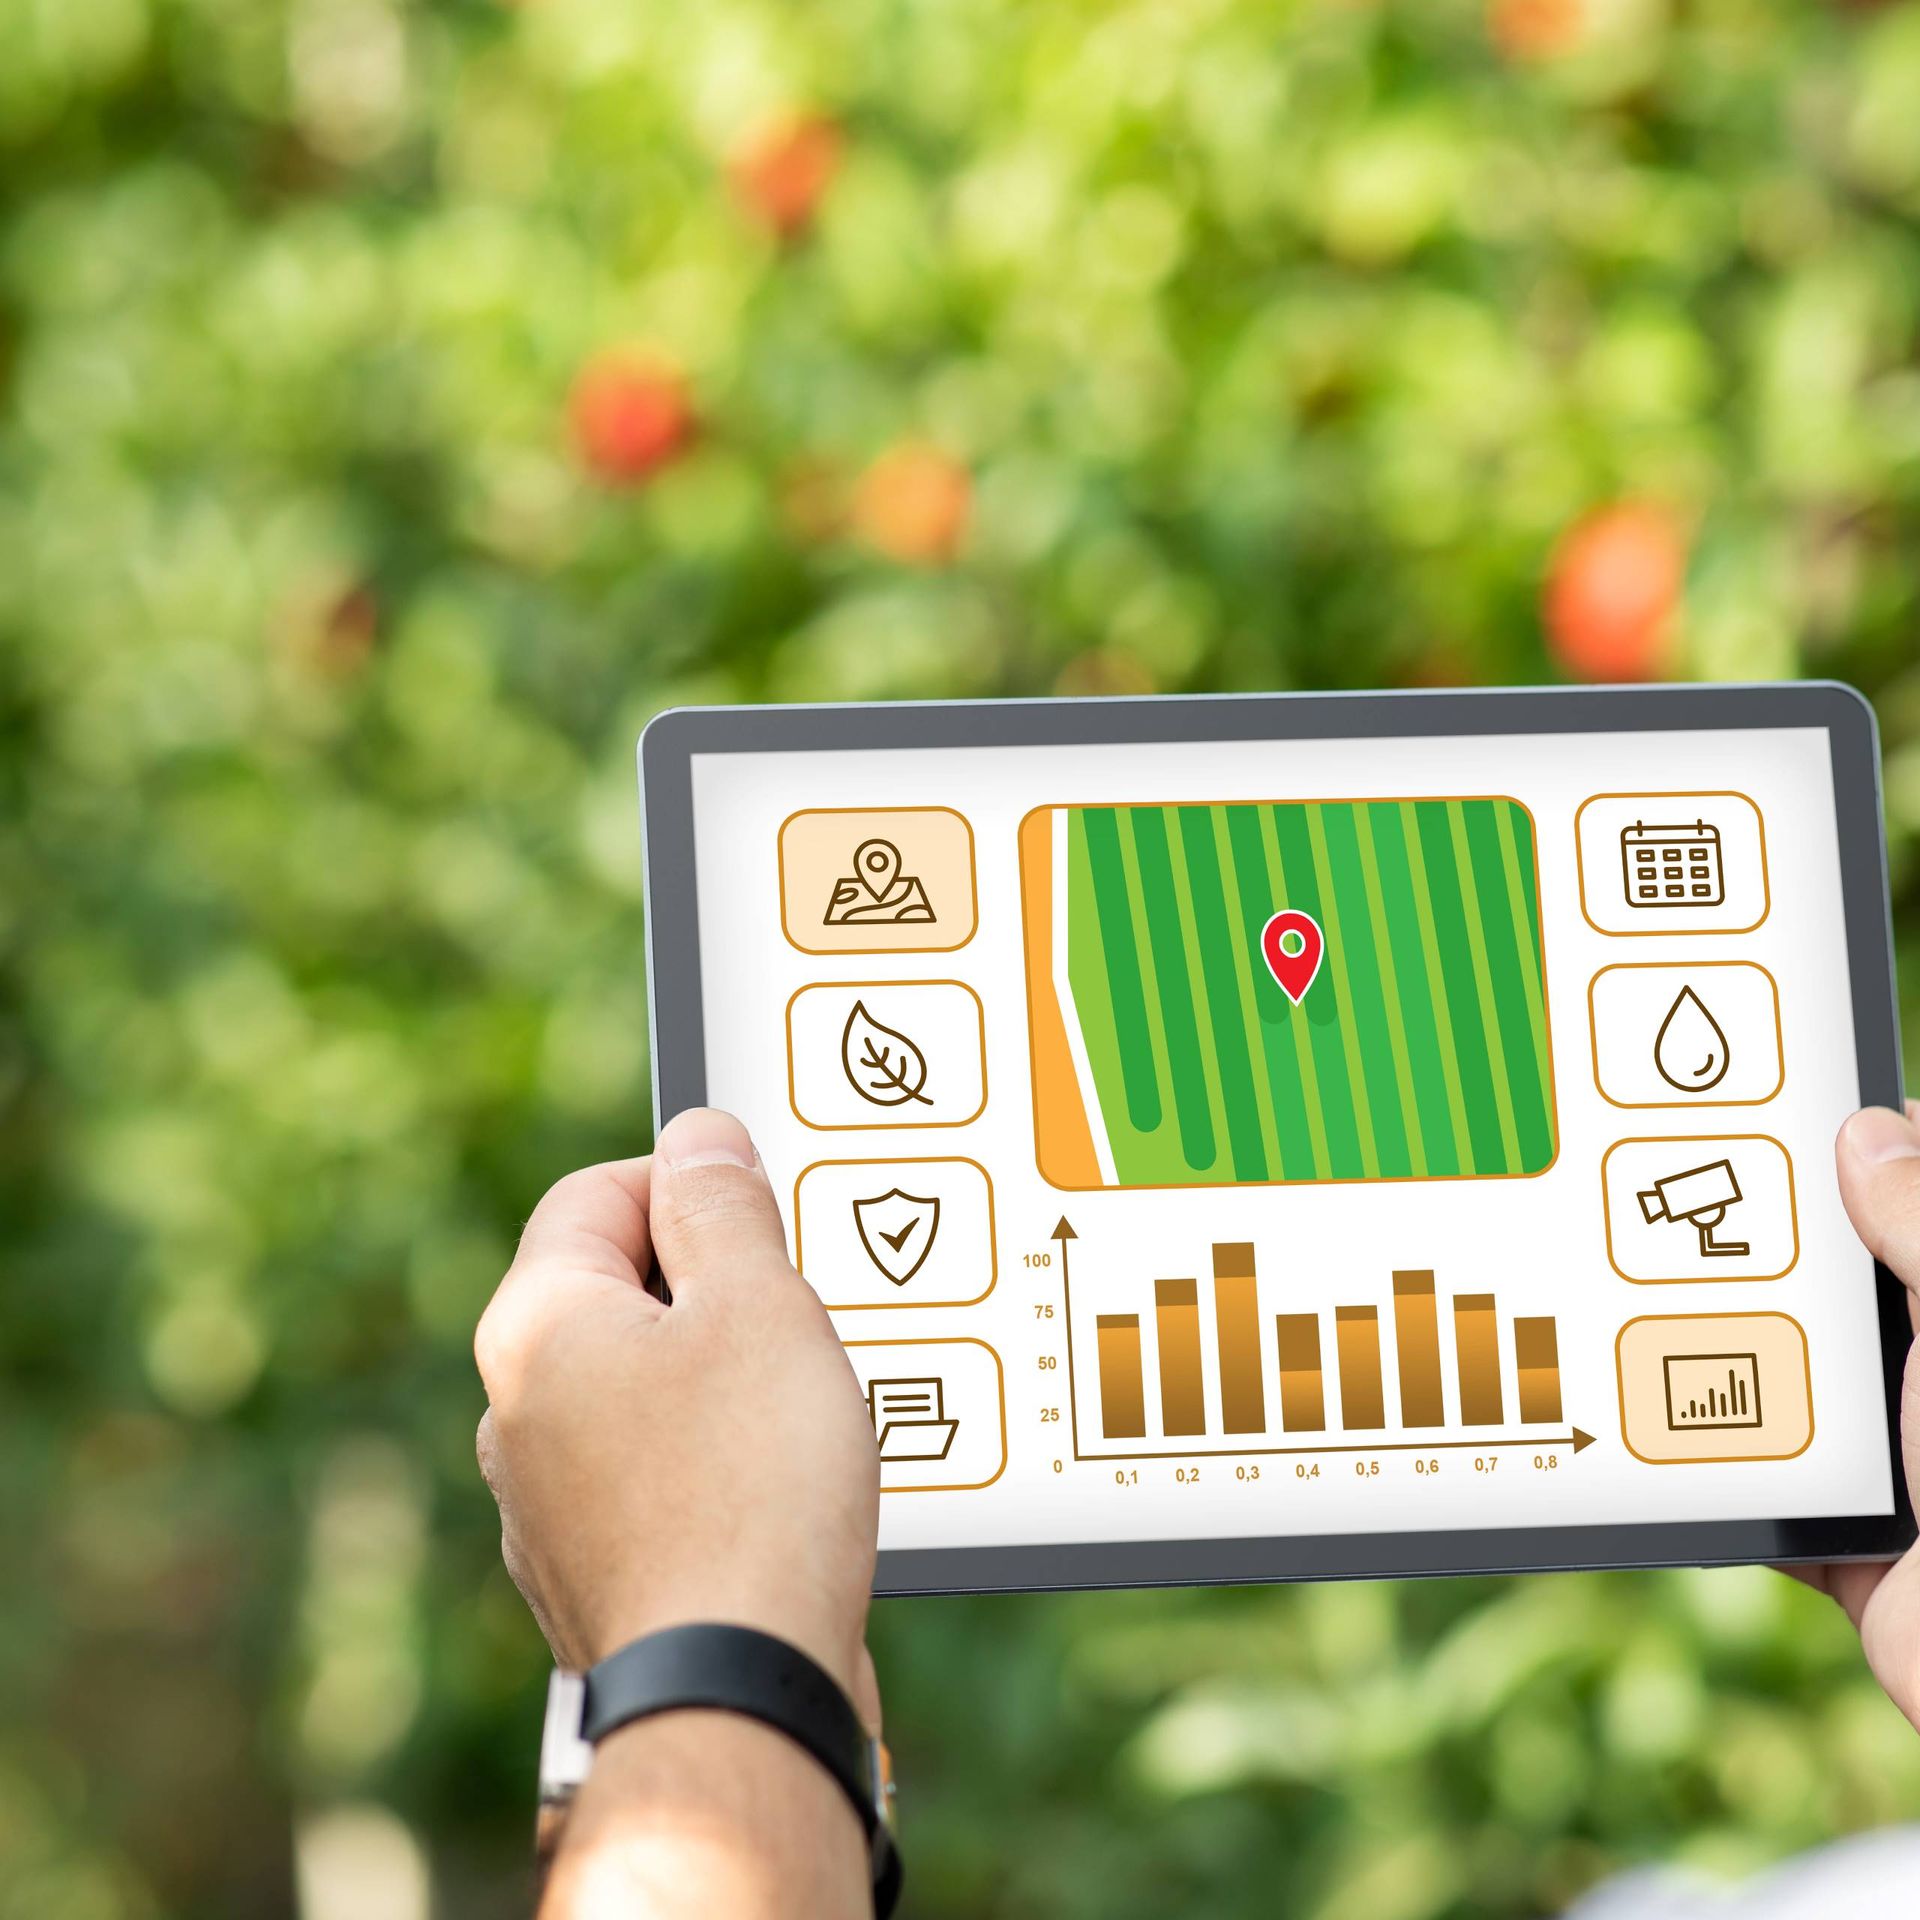 Image of a producer assessing environmental metrics in the field using a tablet